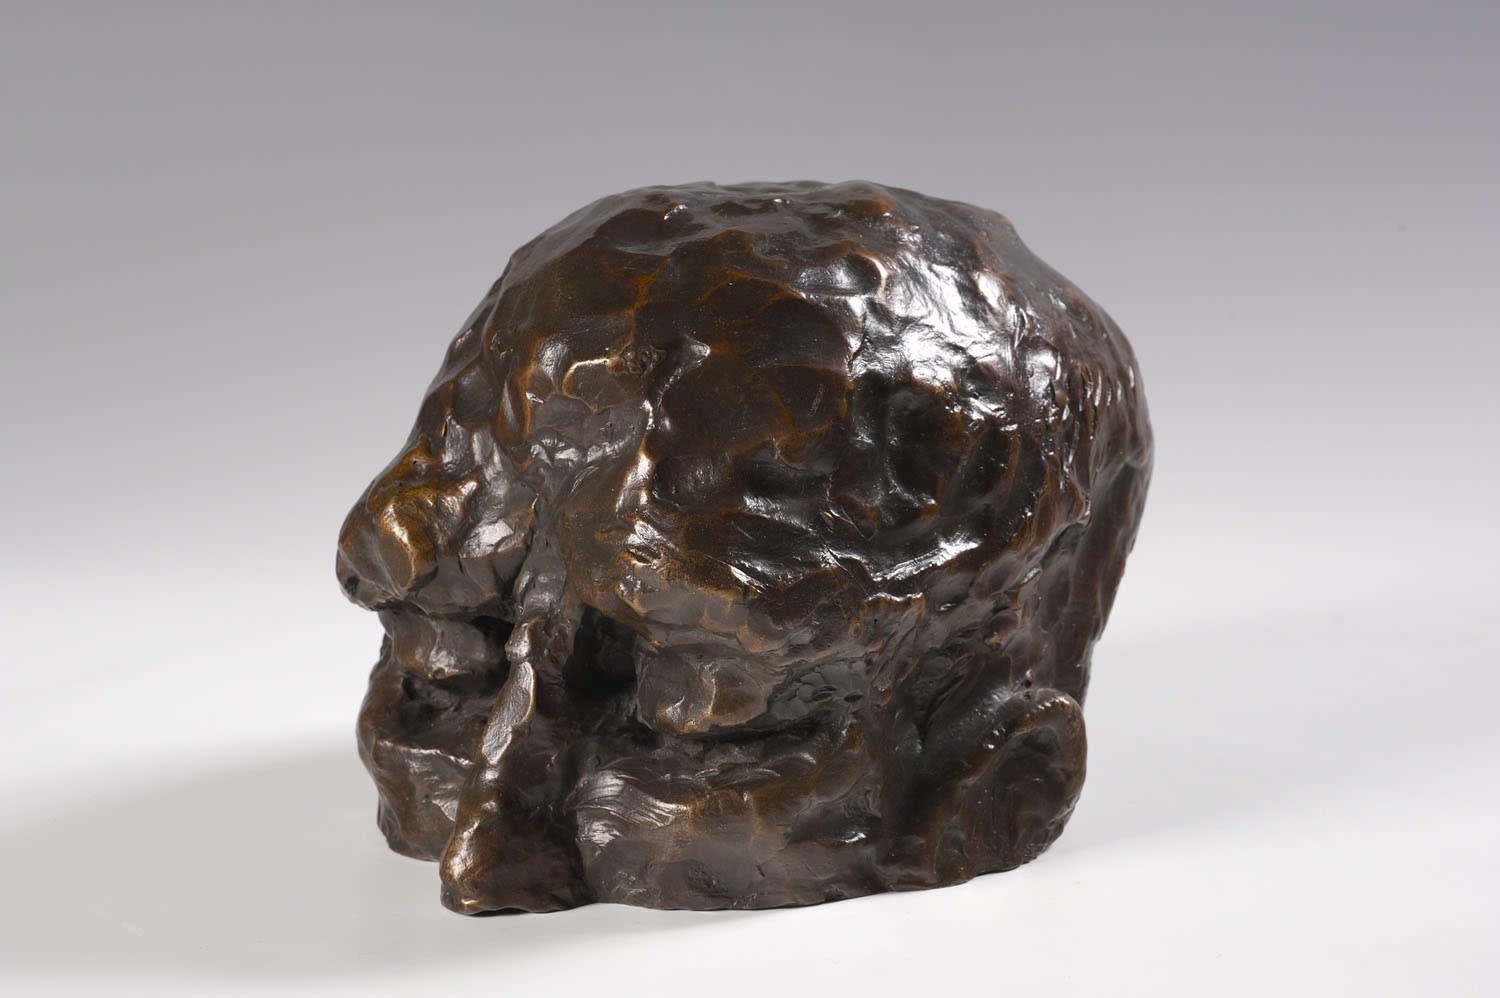 David Breuer-Weil (1965-) Maquette for Visitor 2010 Bronze with brown patina 18 x 17 x 23 cm Ben Uri Collection © David Breuer-Weil To see and discover more about this artist click here